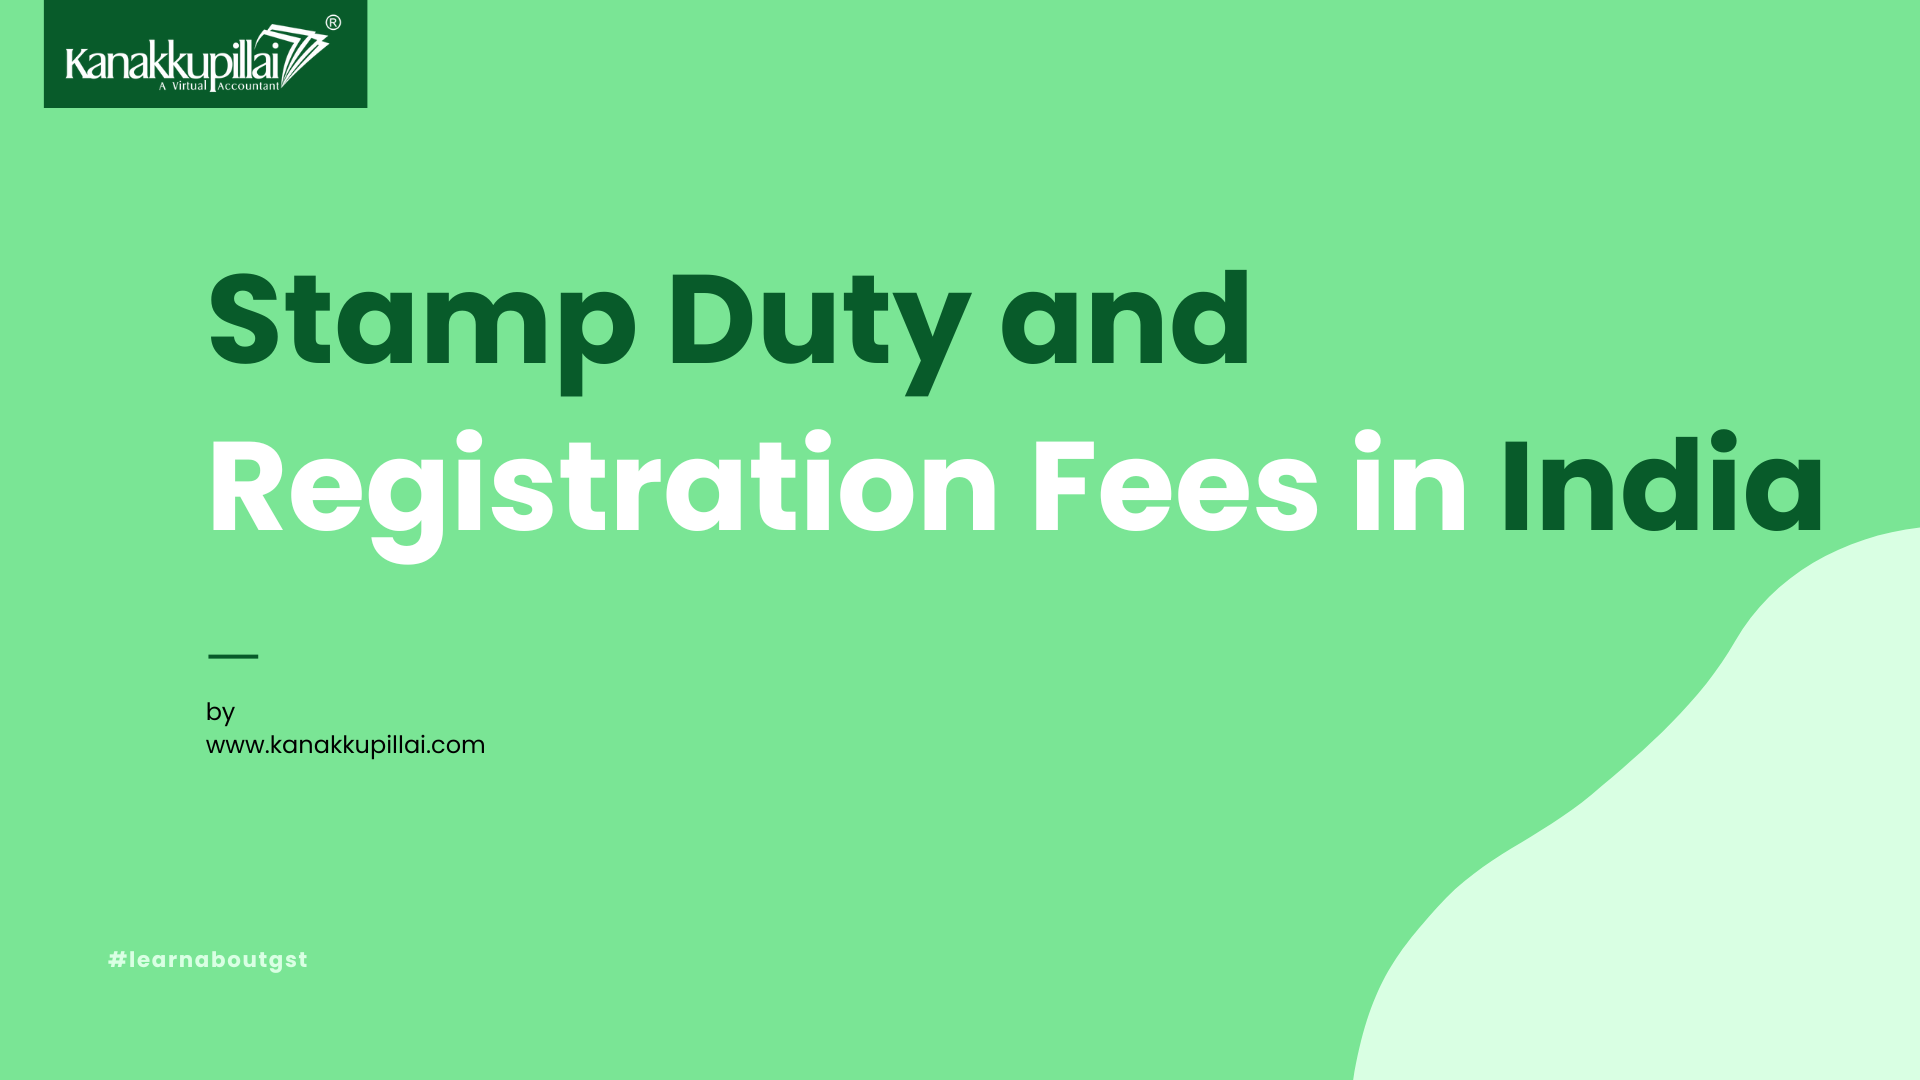 Stamp Duty and Registration Fees in India